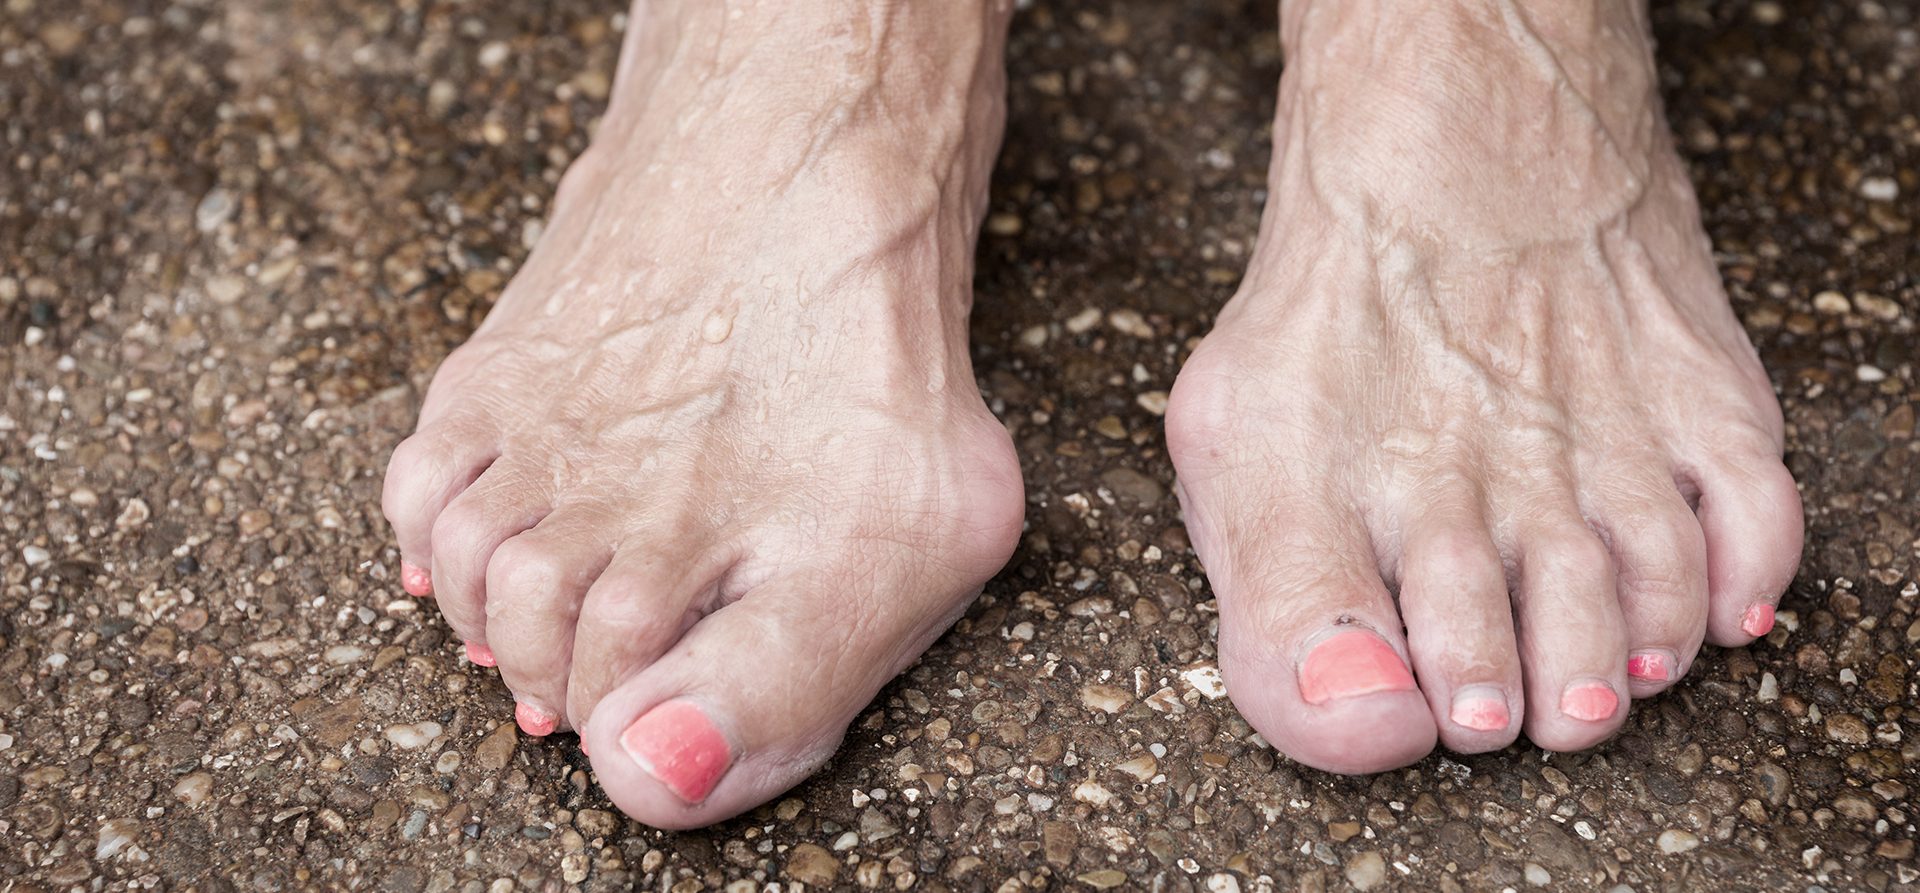 What is a bunion? And other common questions about bunions - UChicago  Medicine